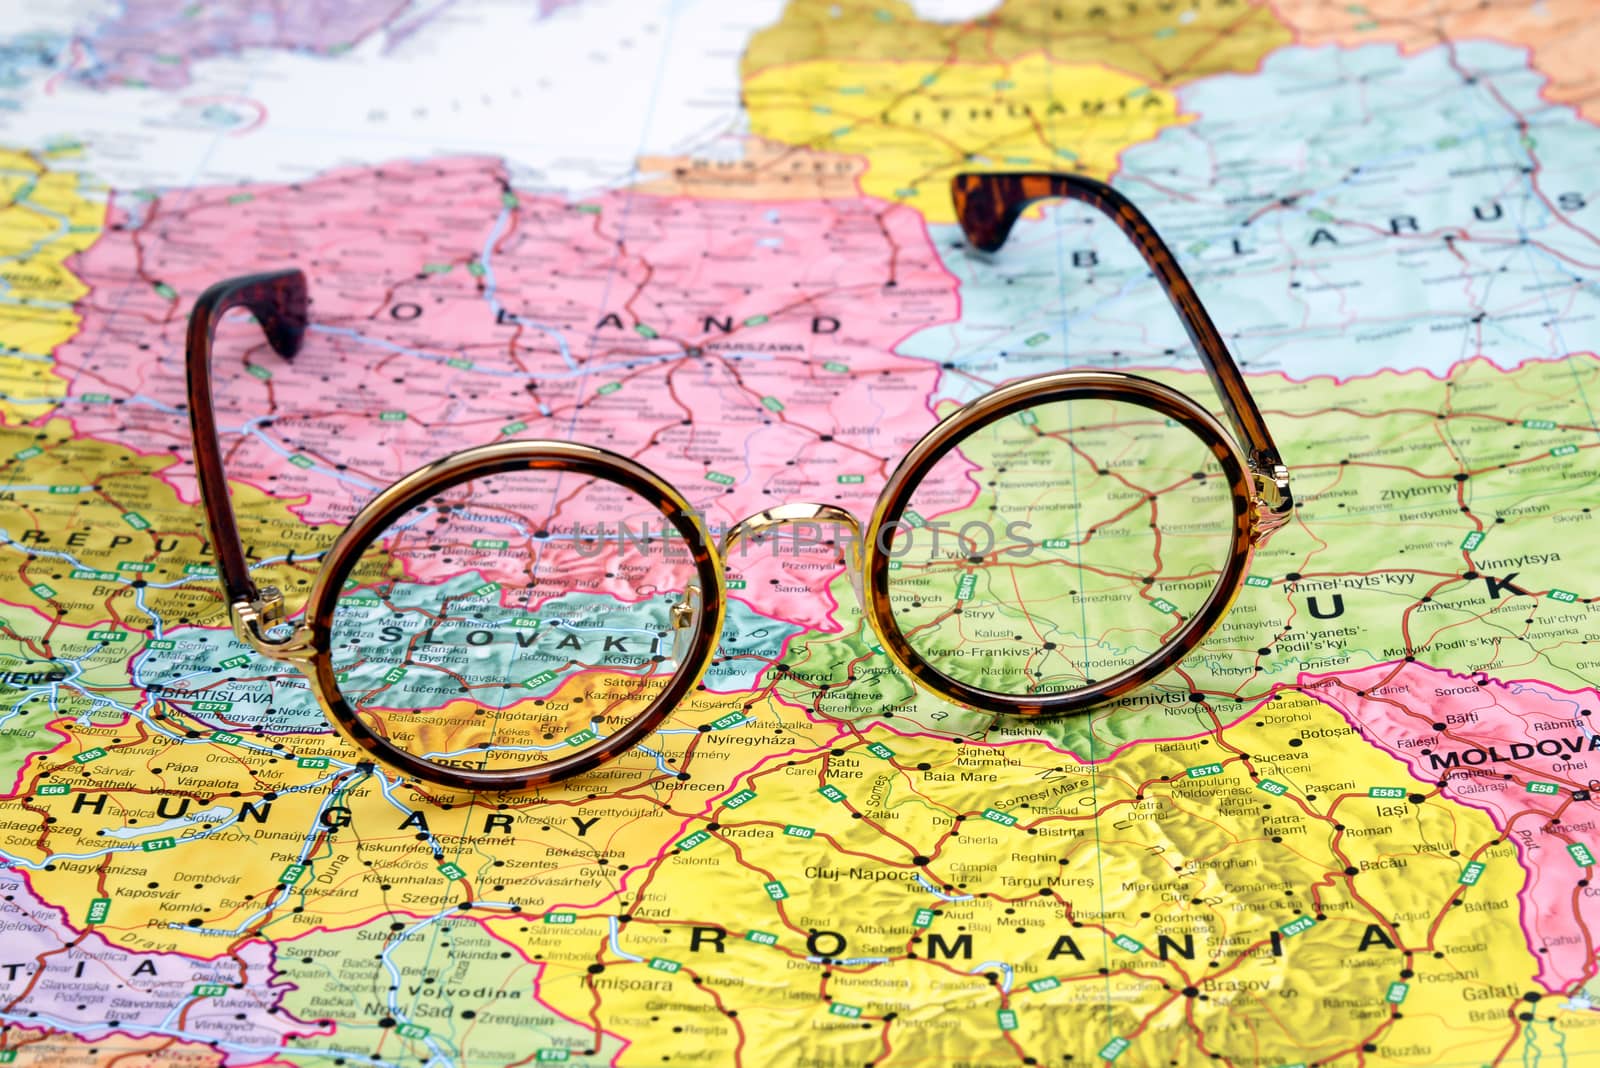 Glasses on a map of europe - Slovakia by dk_photos